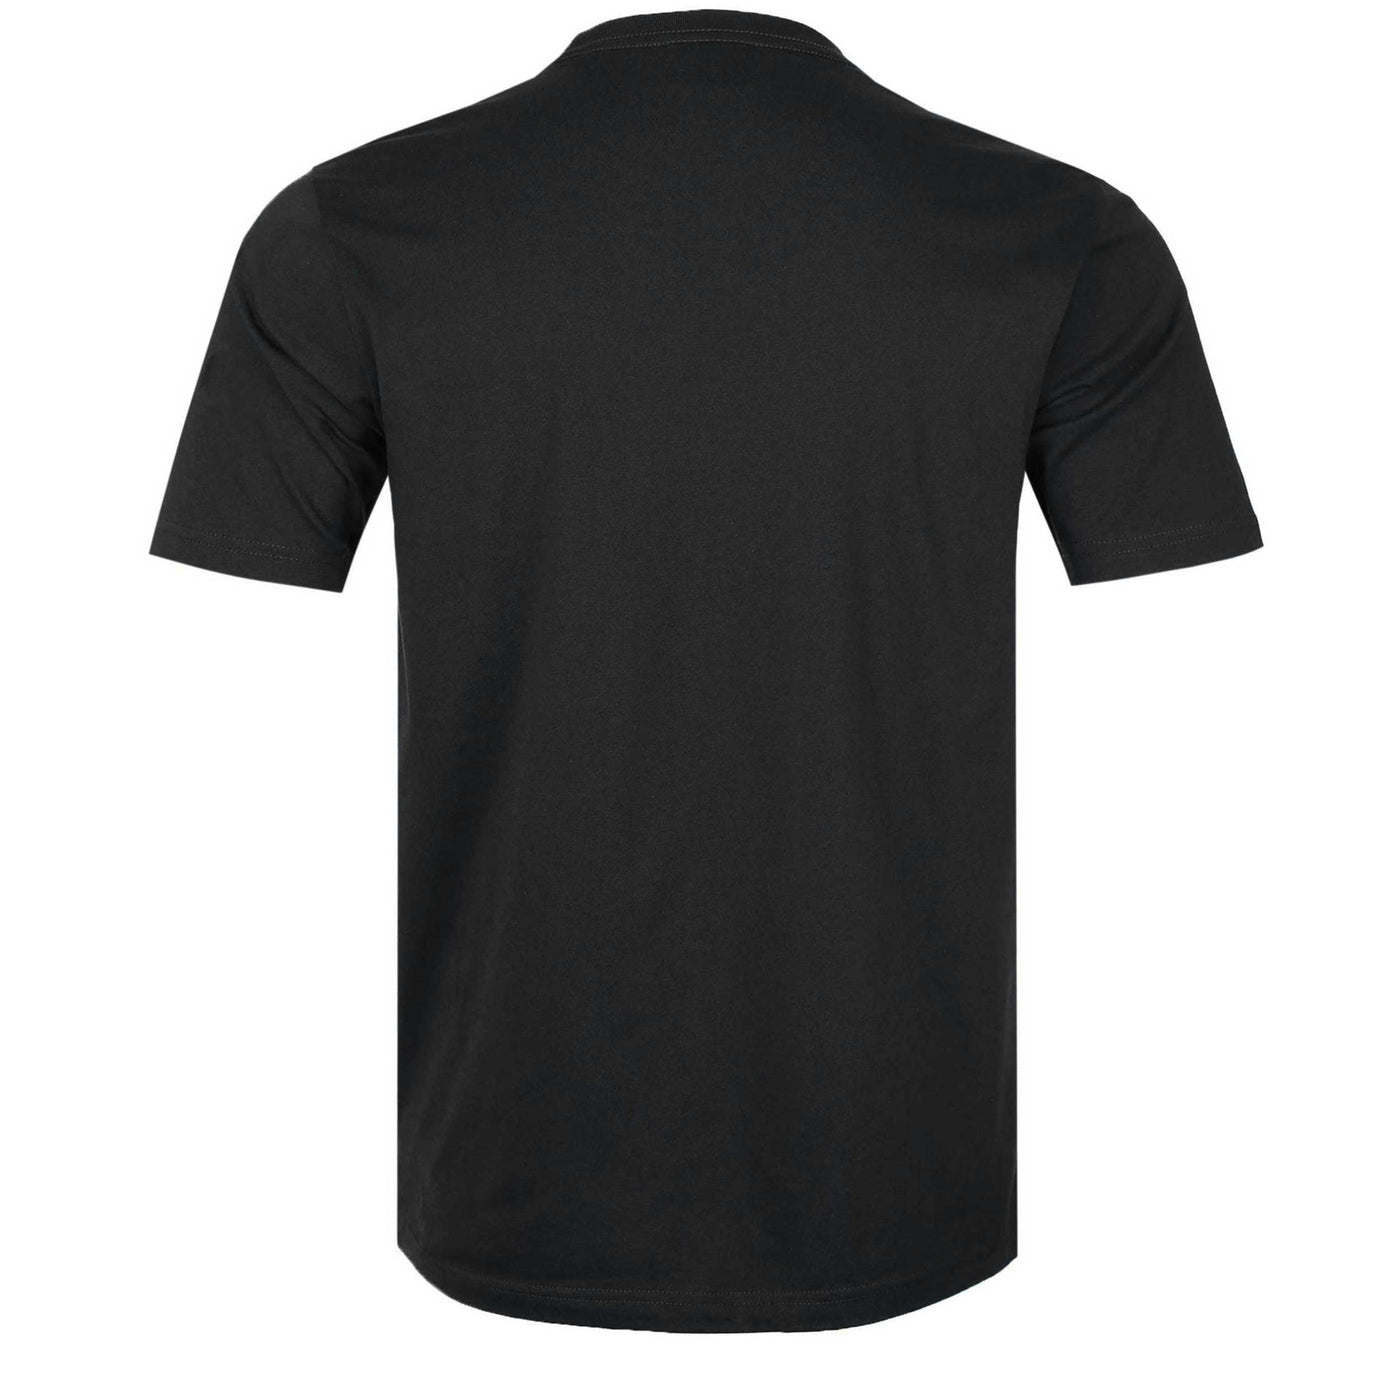 Paul Smith Bicycle T Shirt in Black Back